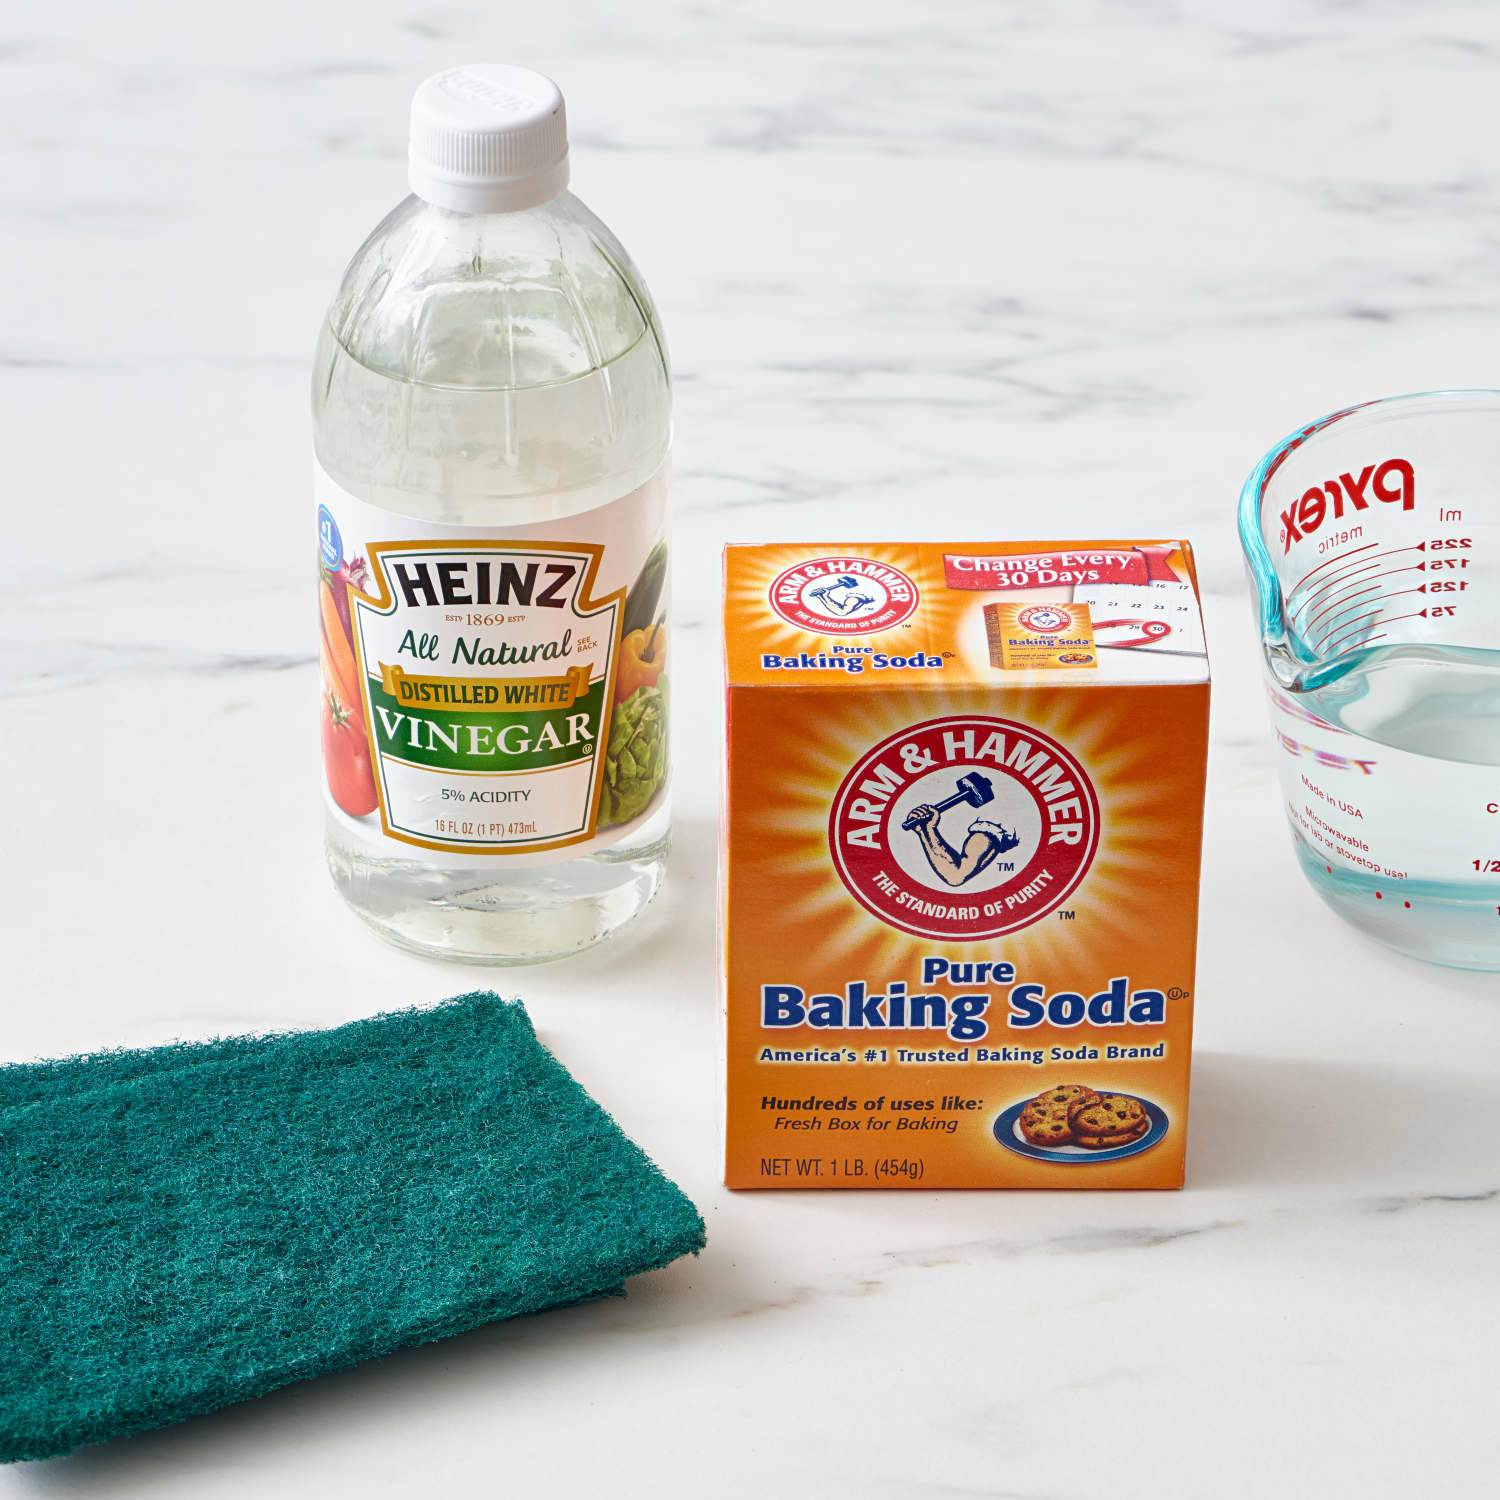 Don't Mix Baking Soda and Vinegar for Cleaning